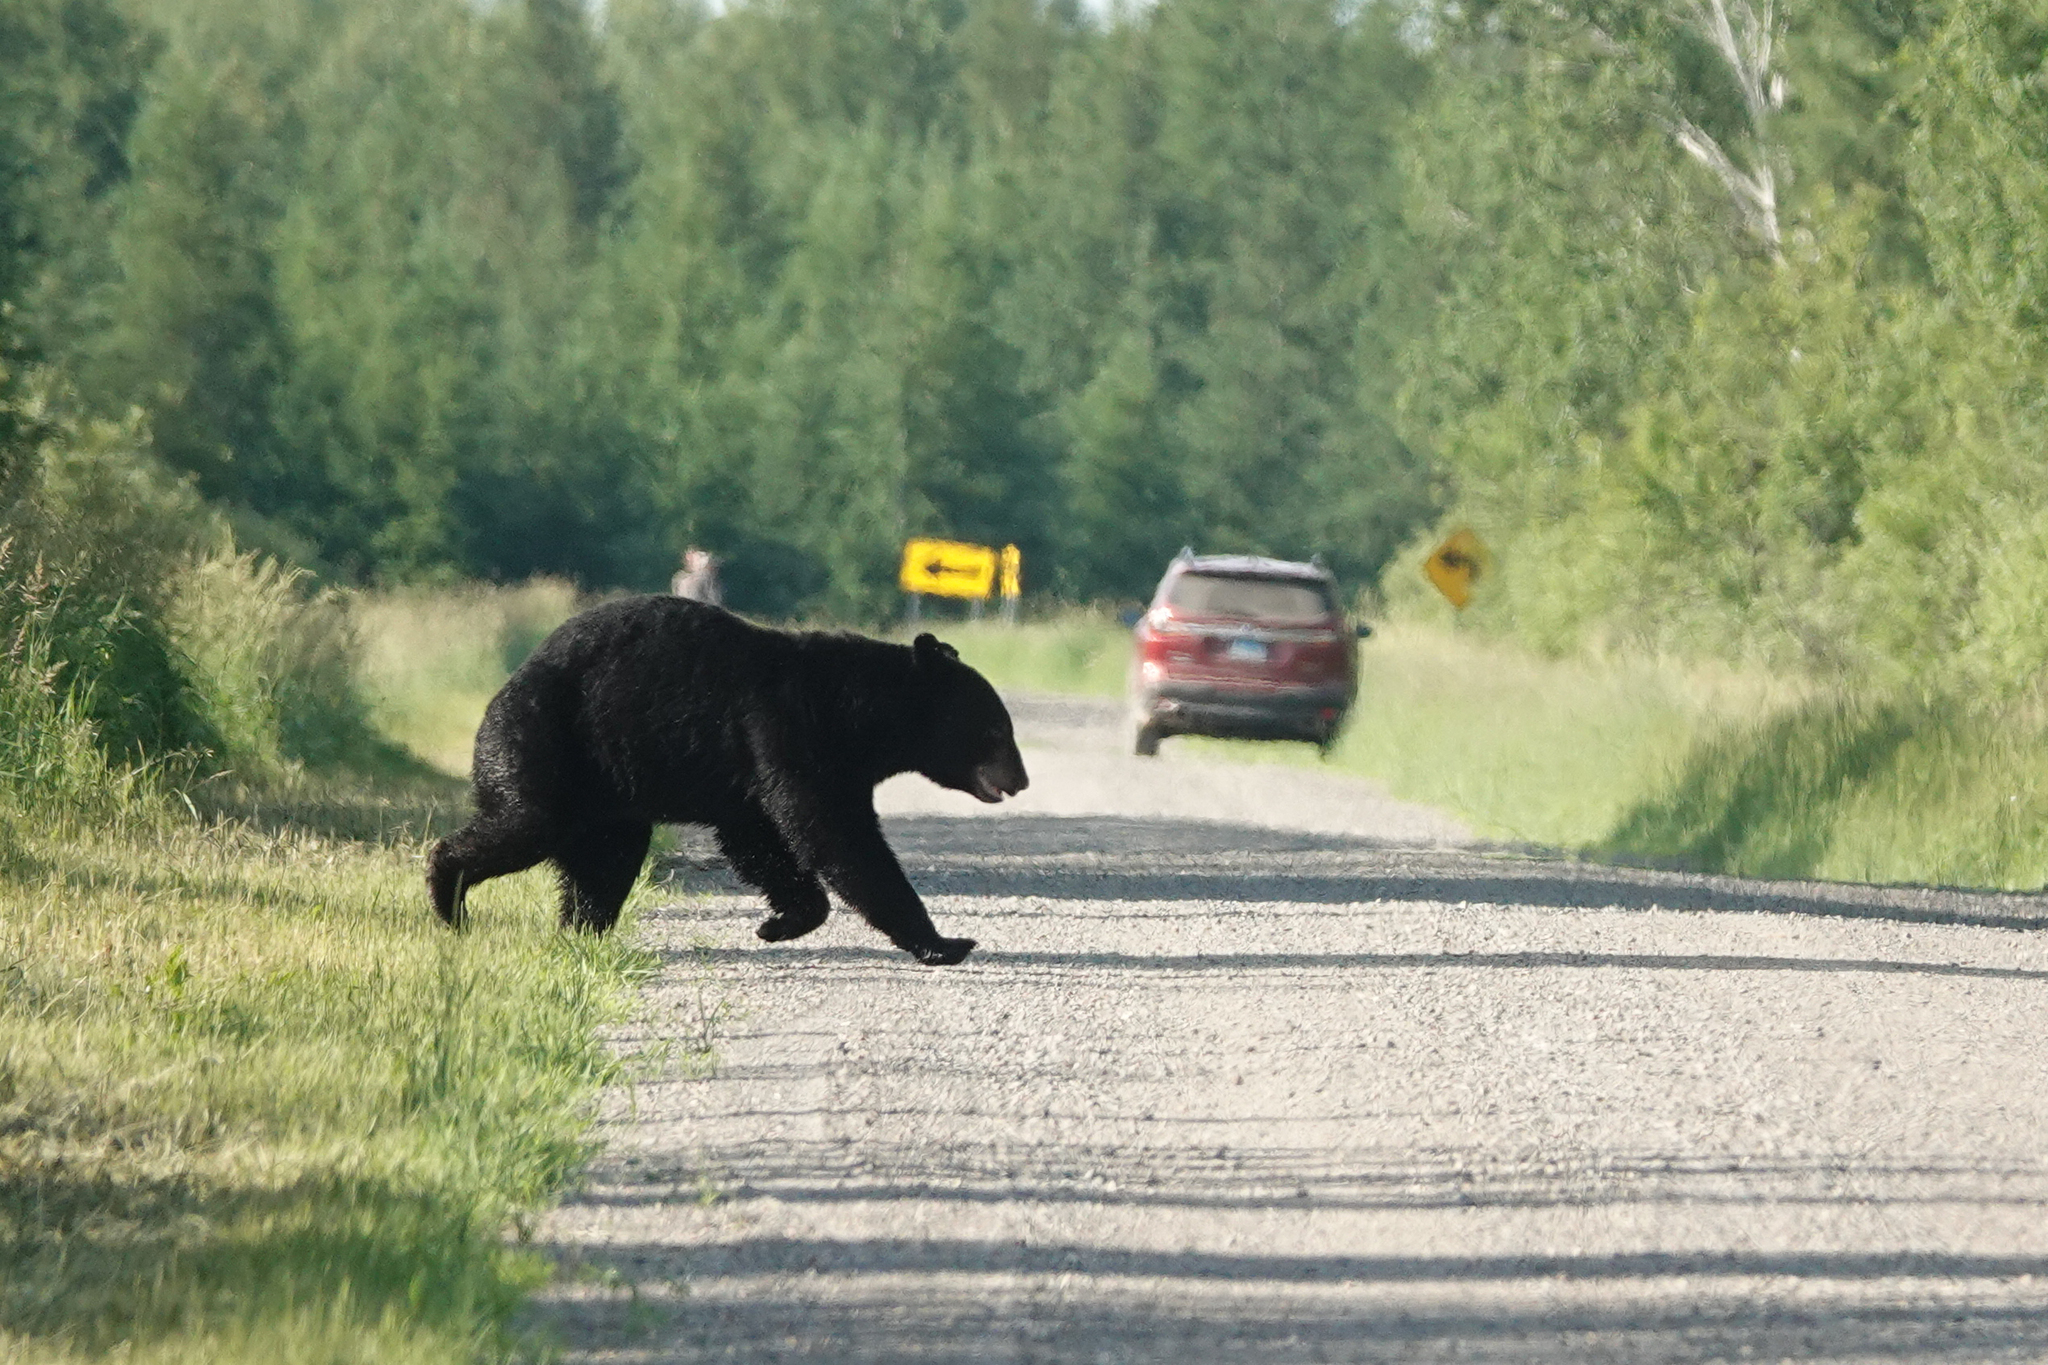 A black bear crosses a gravel road. The scene is a forested environment with a strip of open area created by the road. A car and road signs are in the distance.